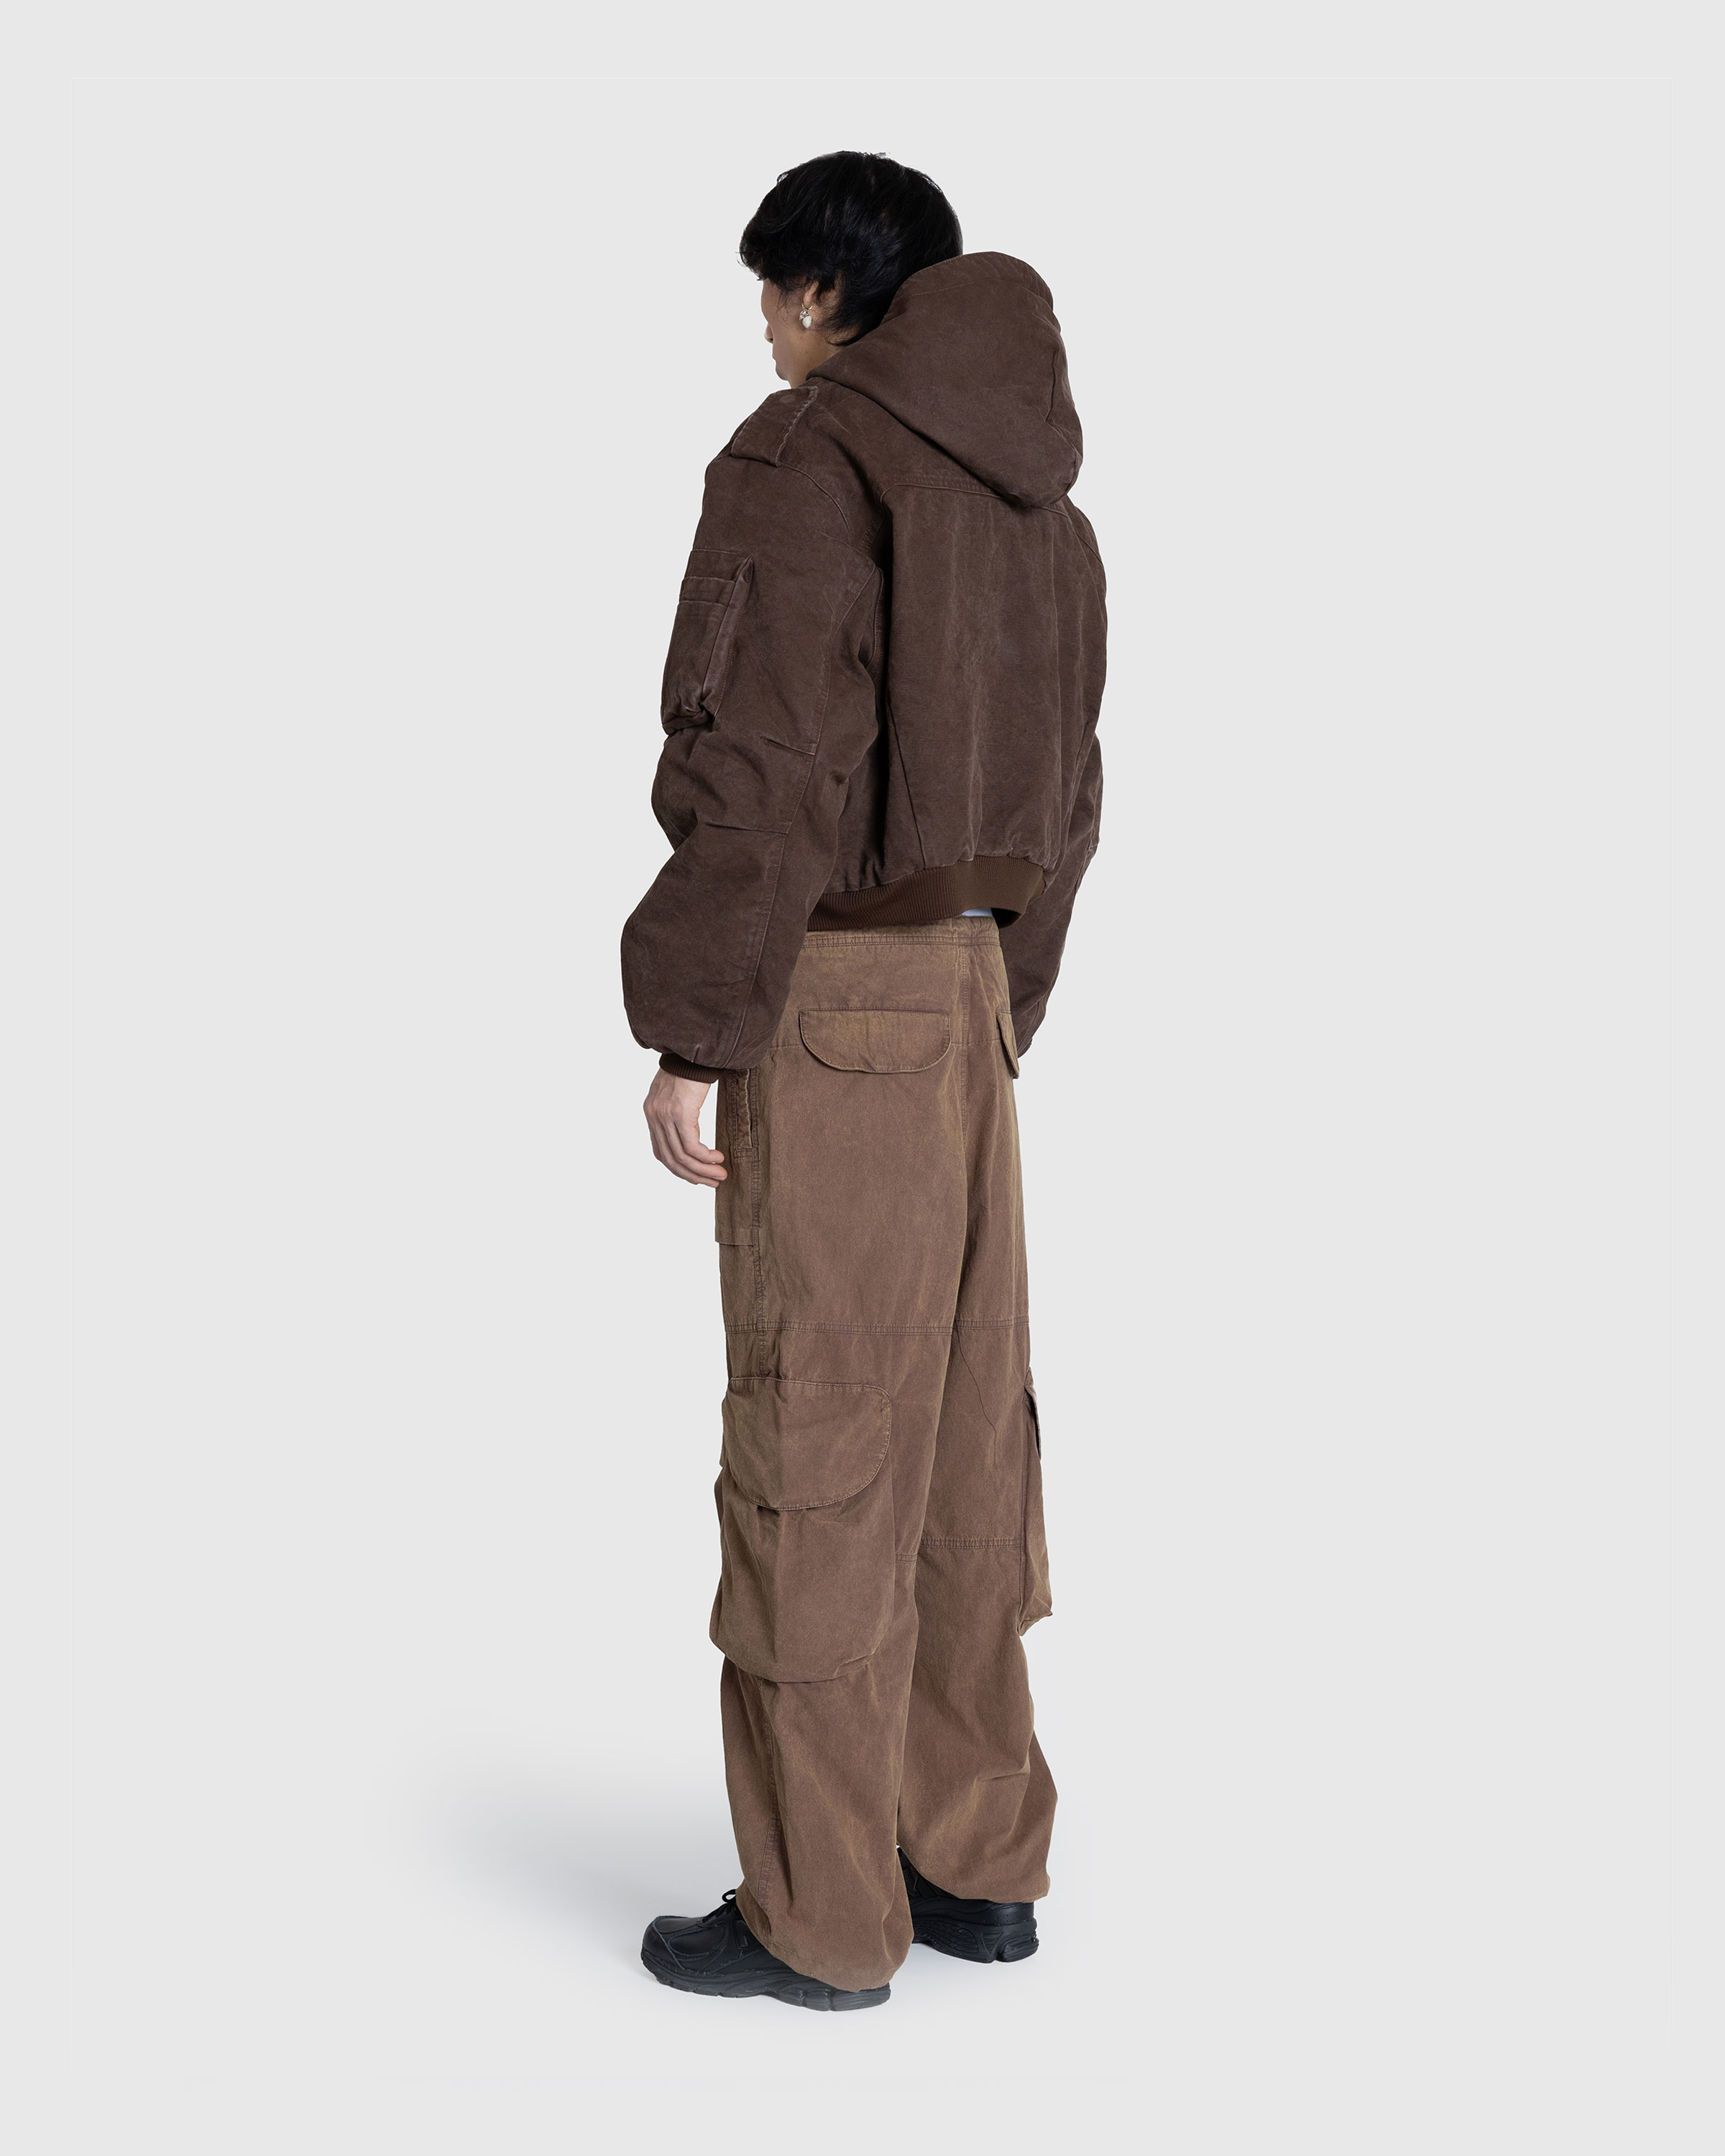 Entire Studios – W2 Bomber Military Mud - Outerwear - Brown - Image 4